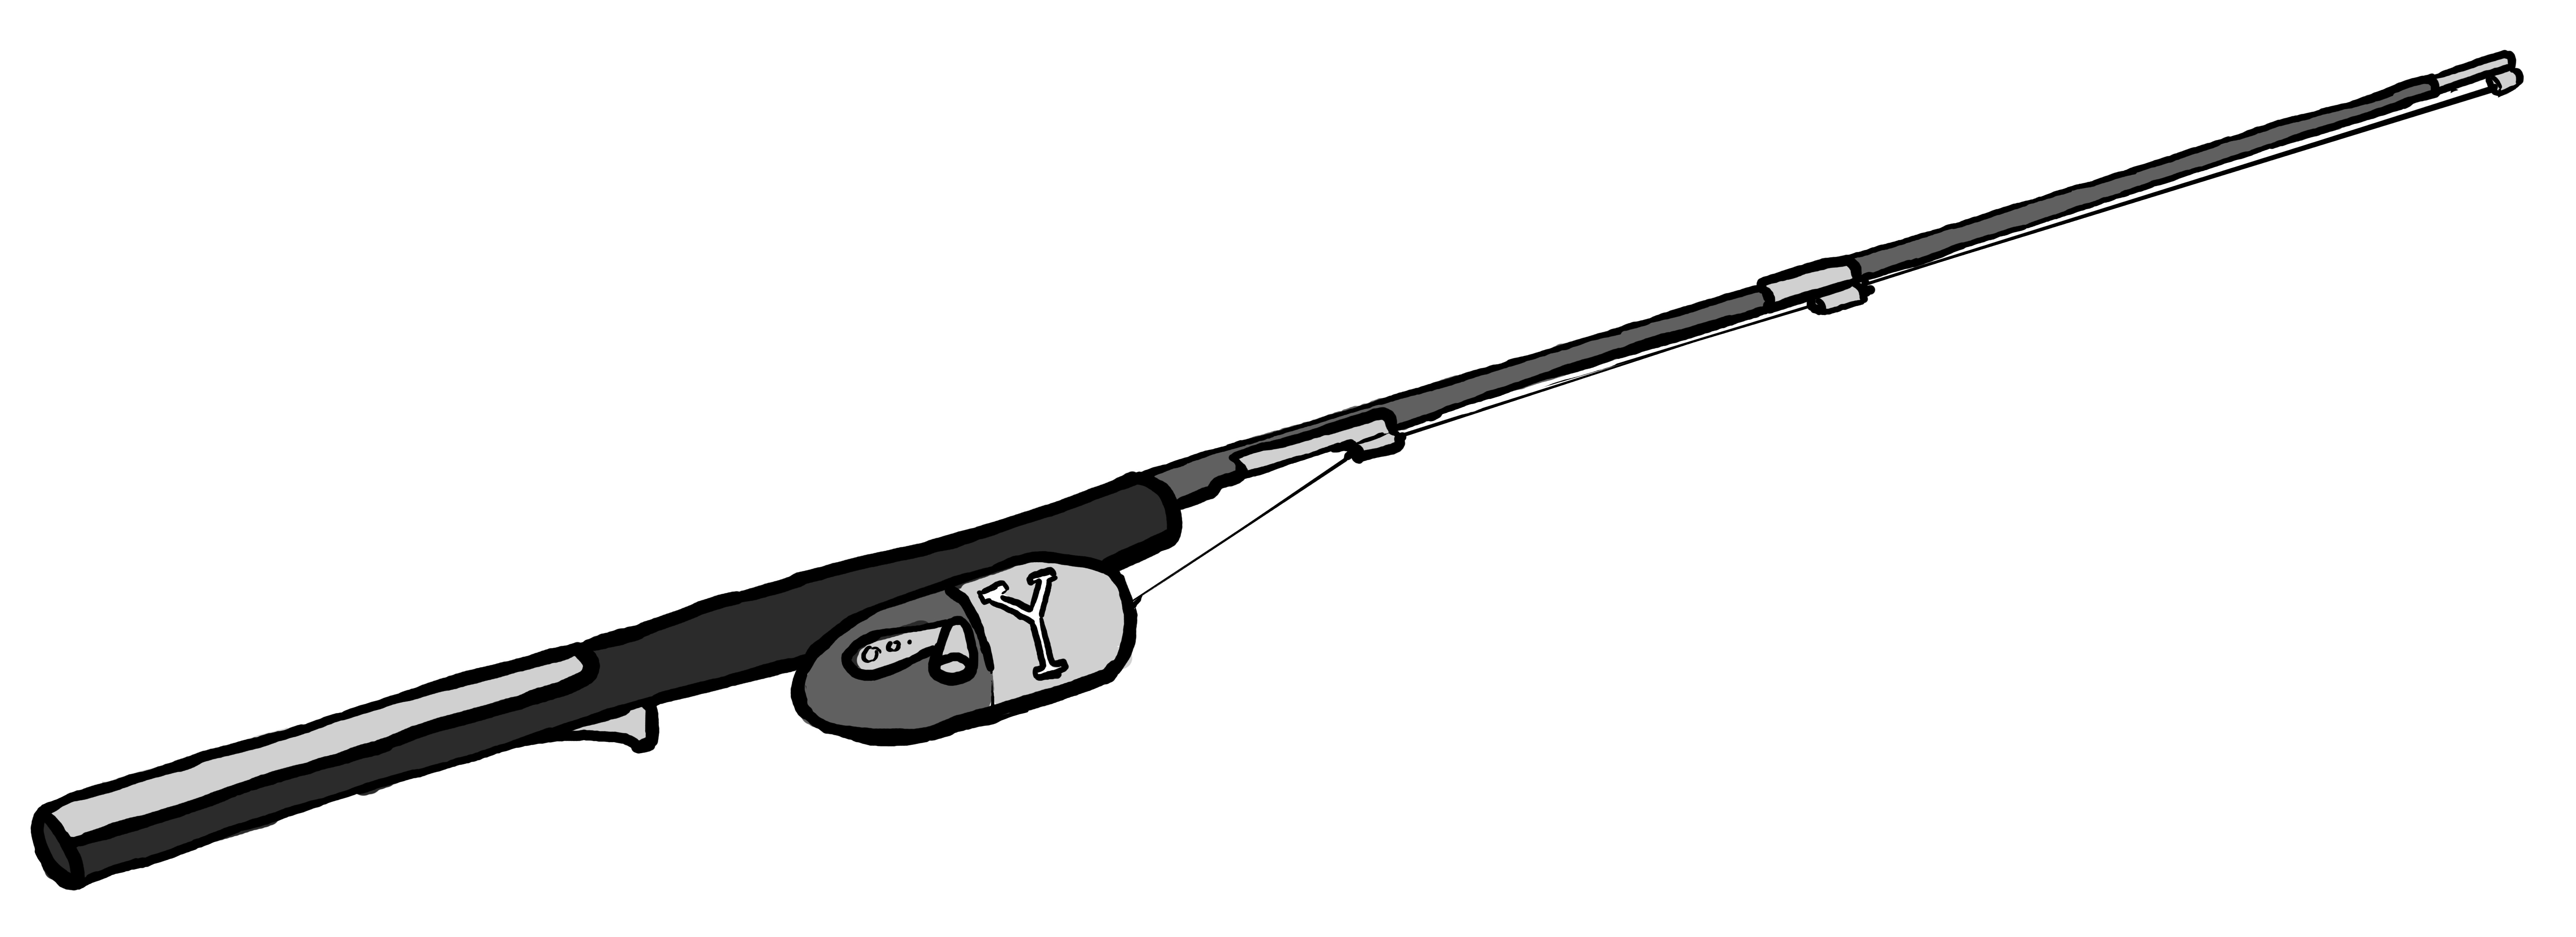 Fishing Pole Picture Png Image Clipart